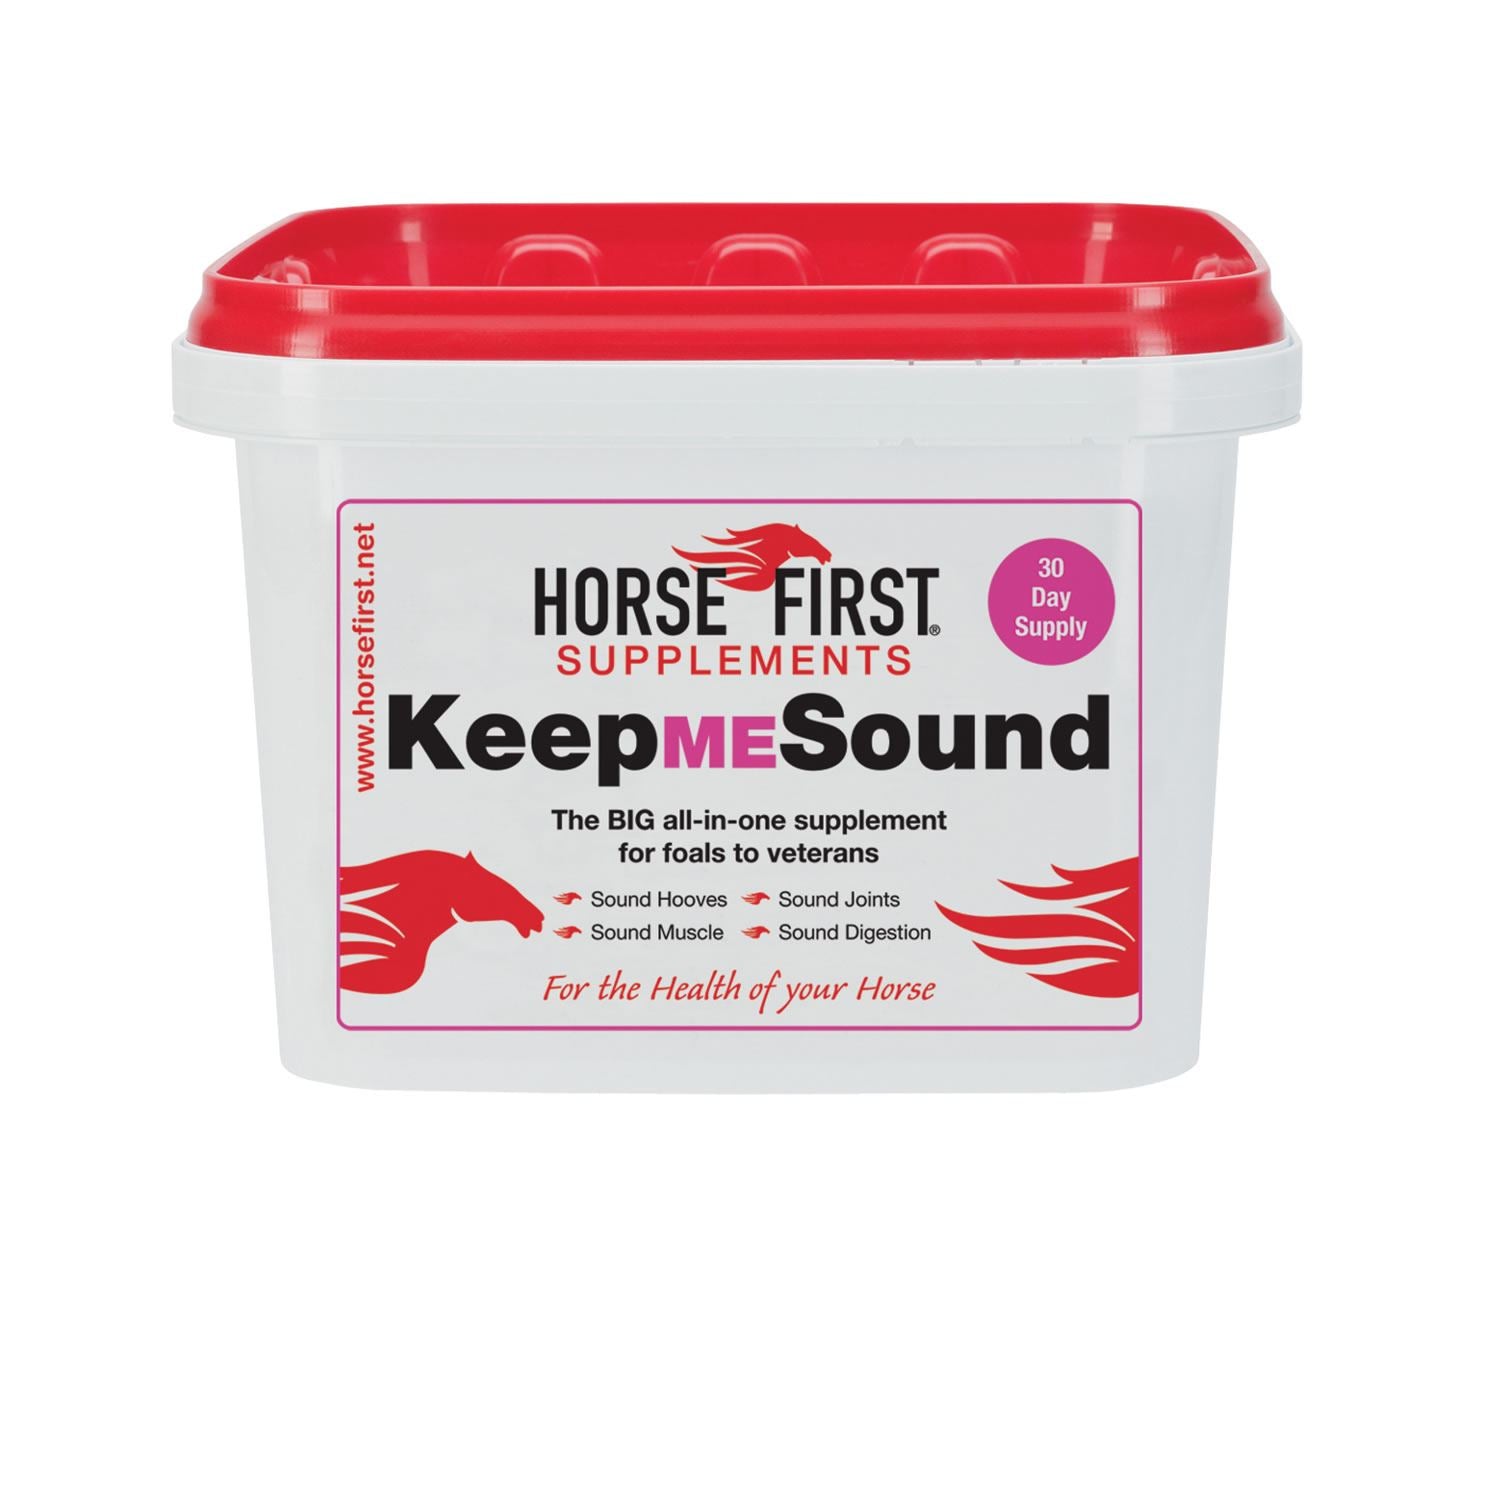 HORSE FIRST KEEP ME SOUND - Supports joints, hooves, coat, and digestive system